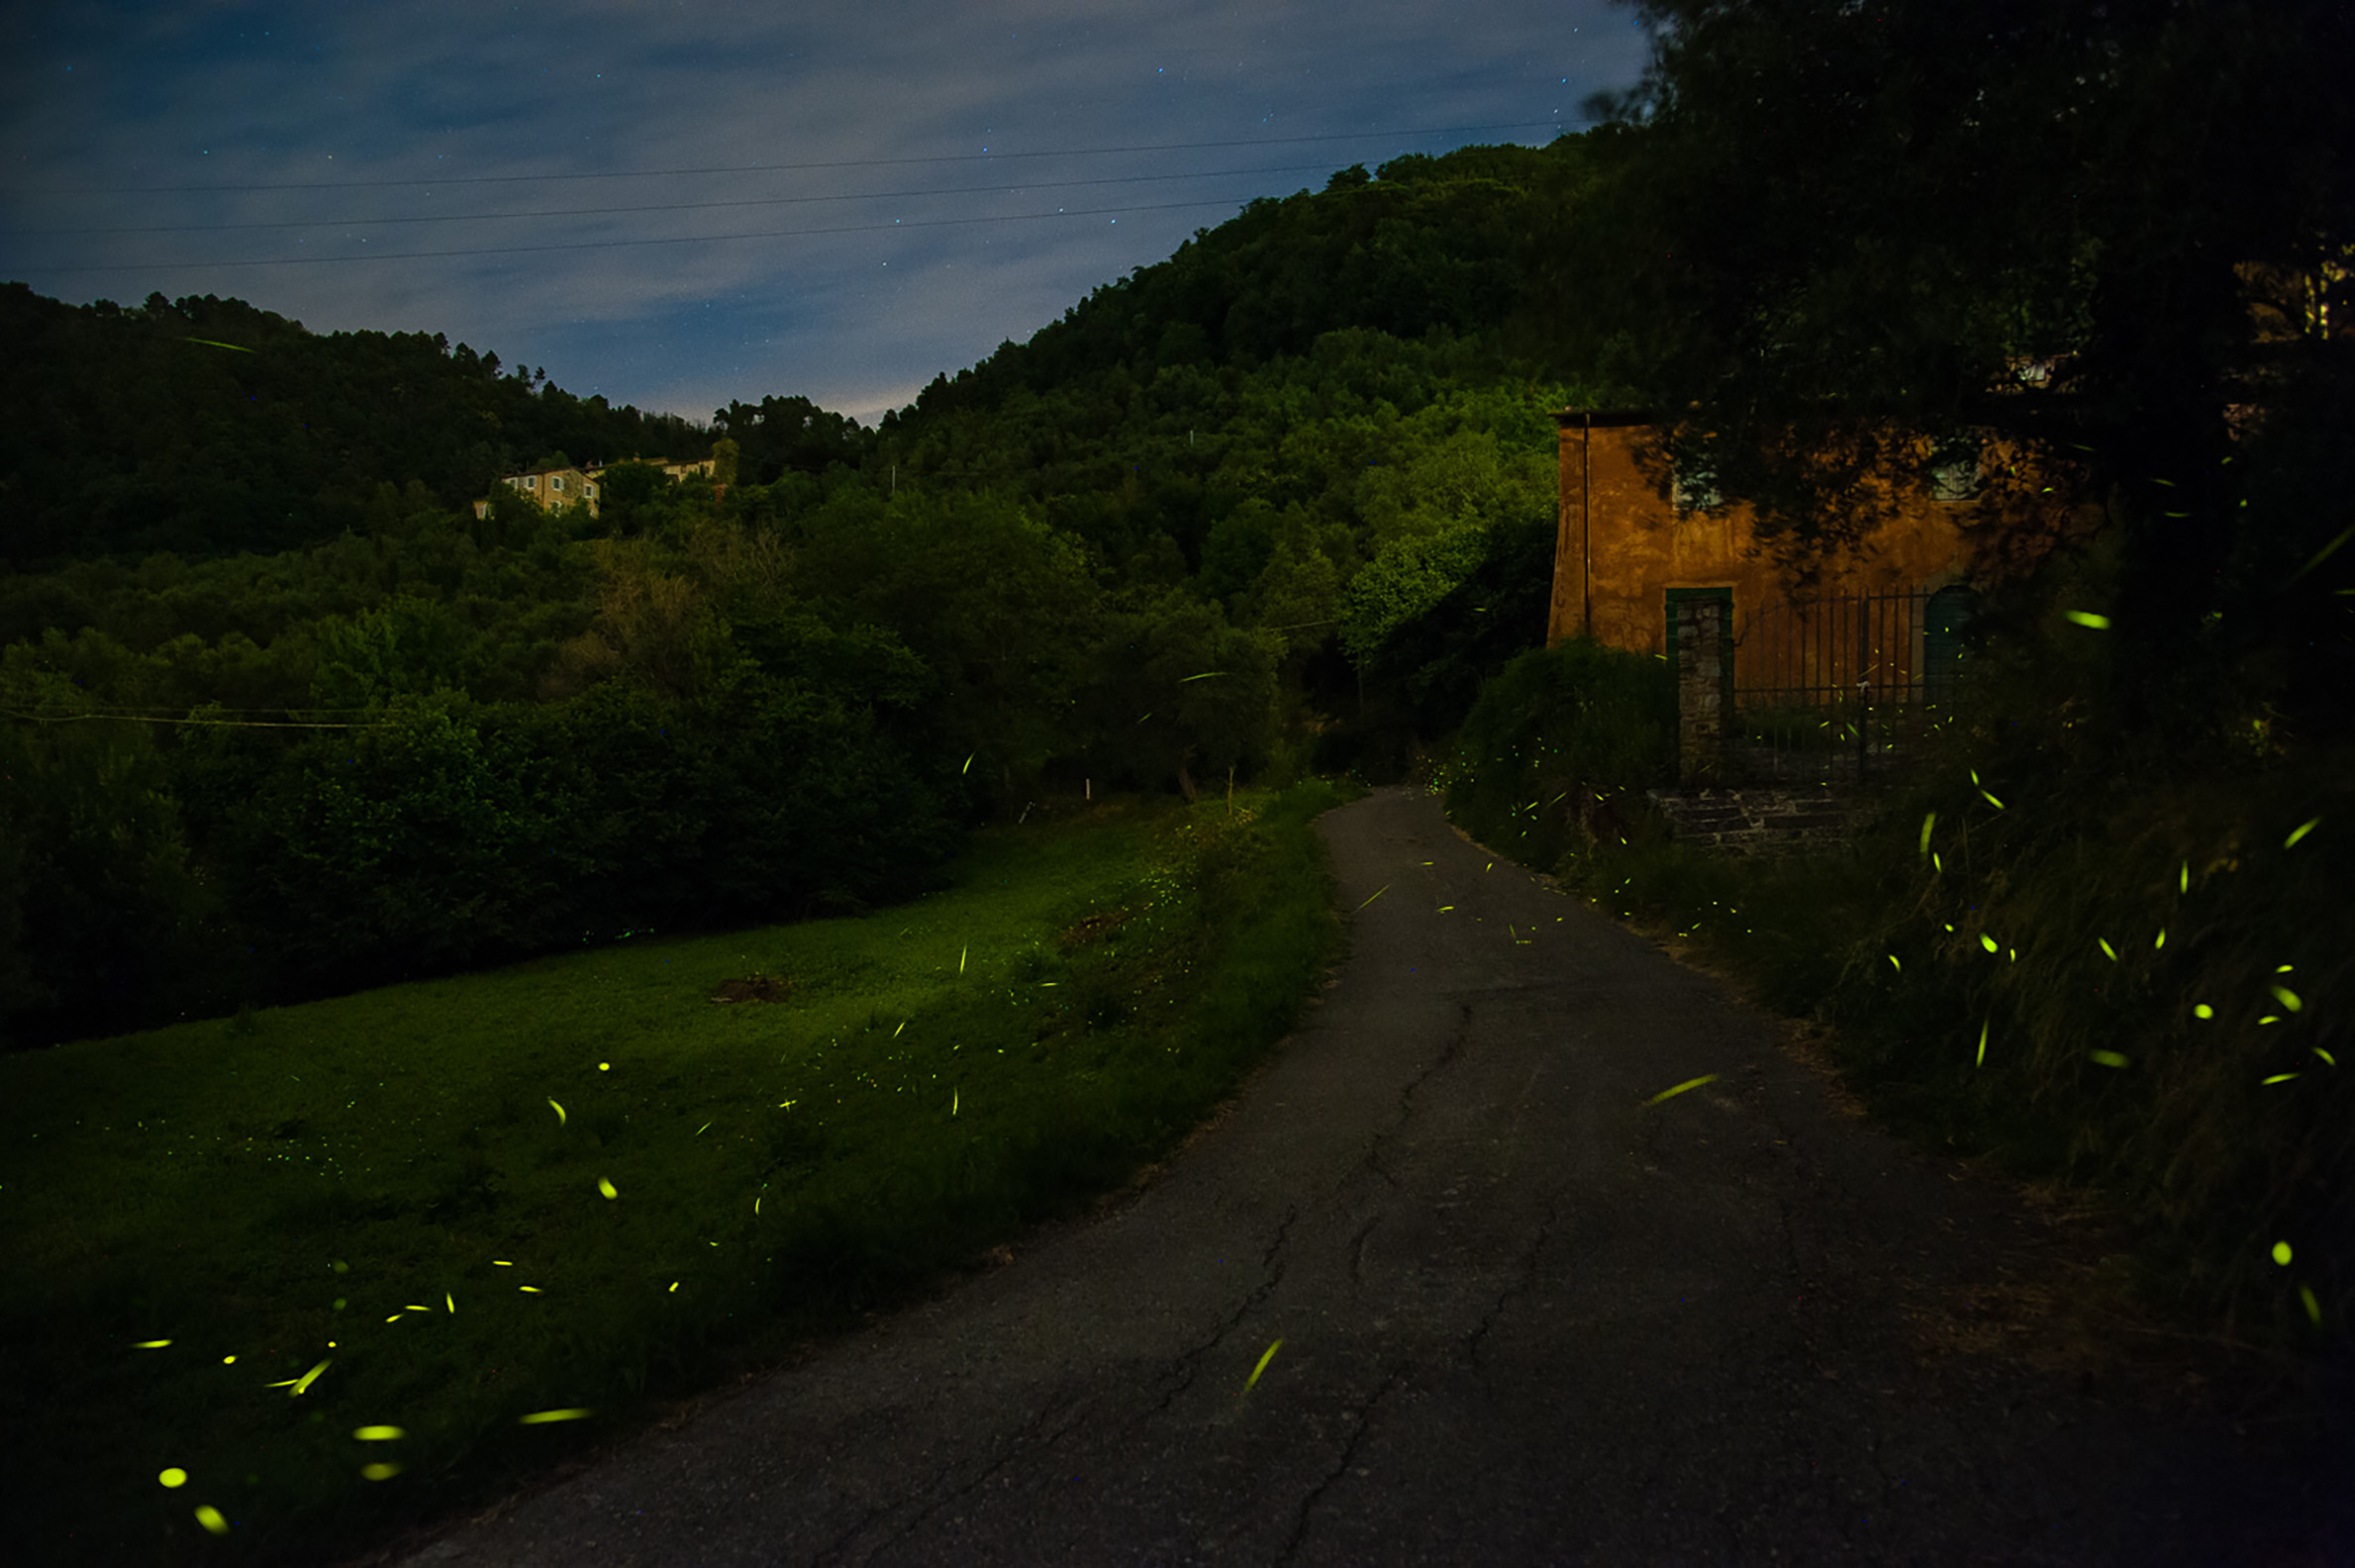 The bright green flashes of fireflies can be seen over a rural driveway